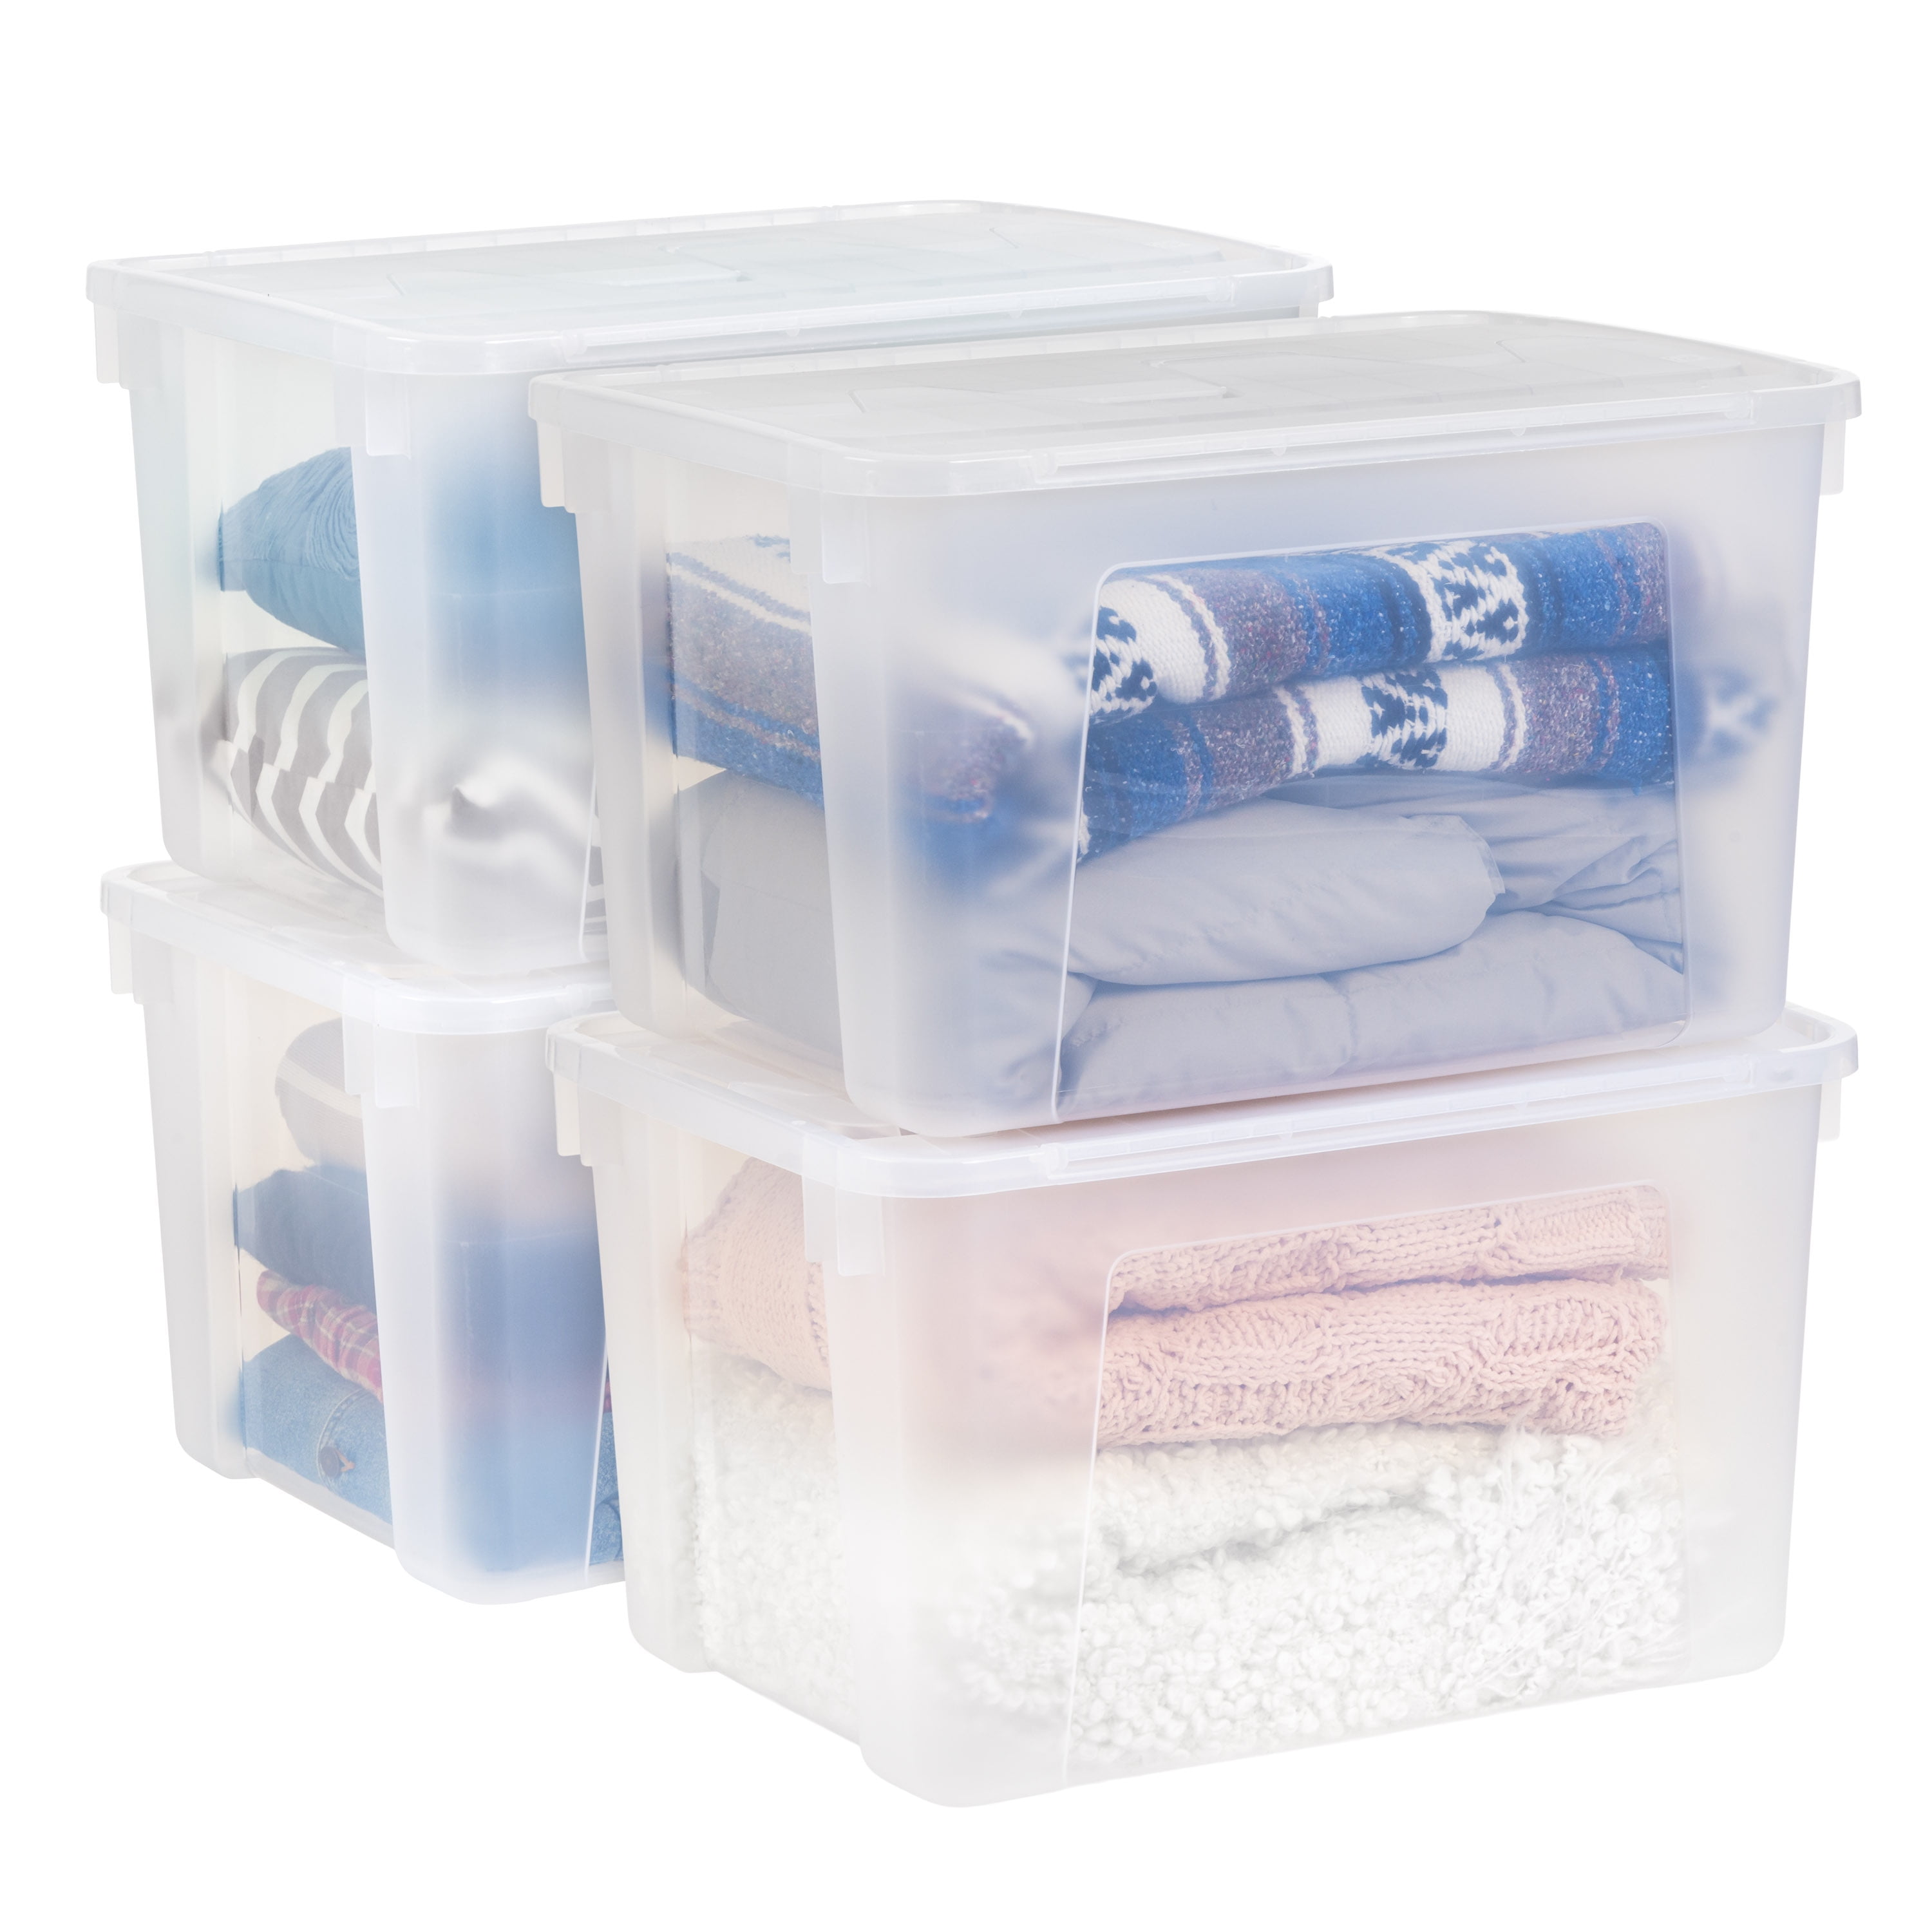 NuCons™: Plastic Containers For Display Racks